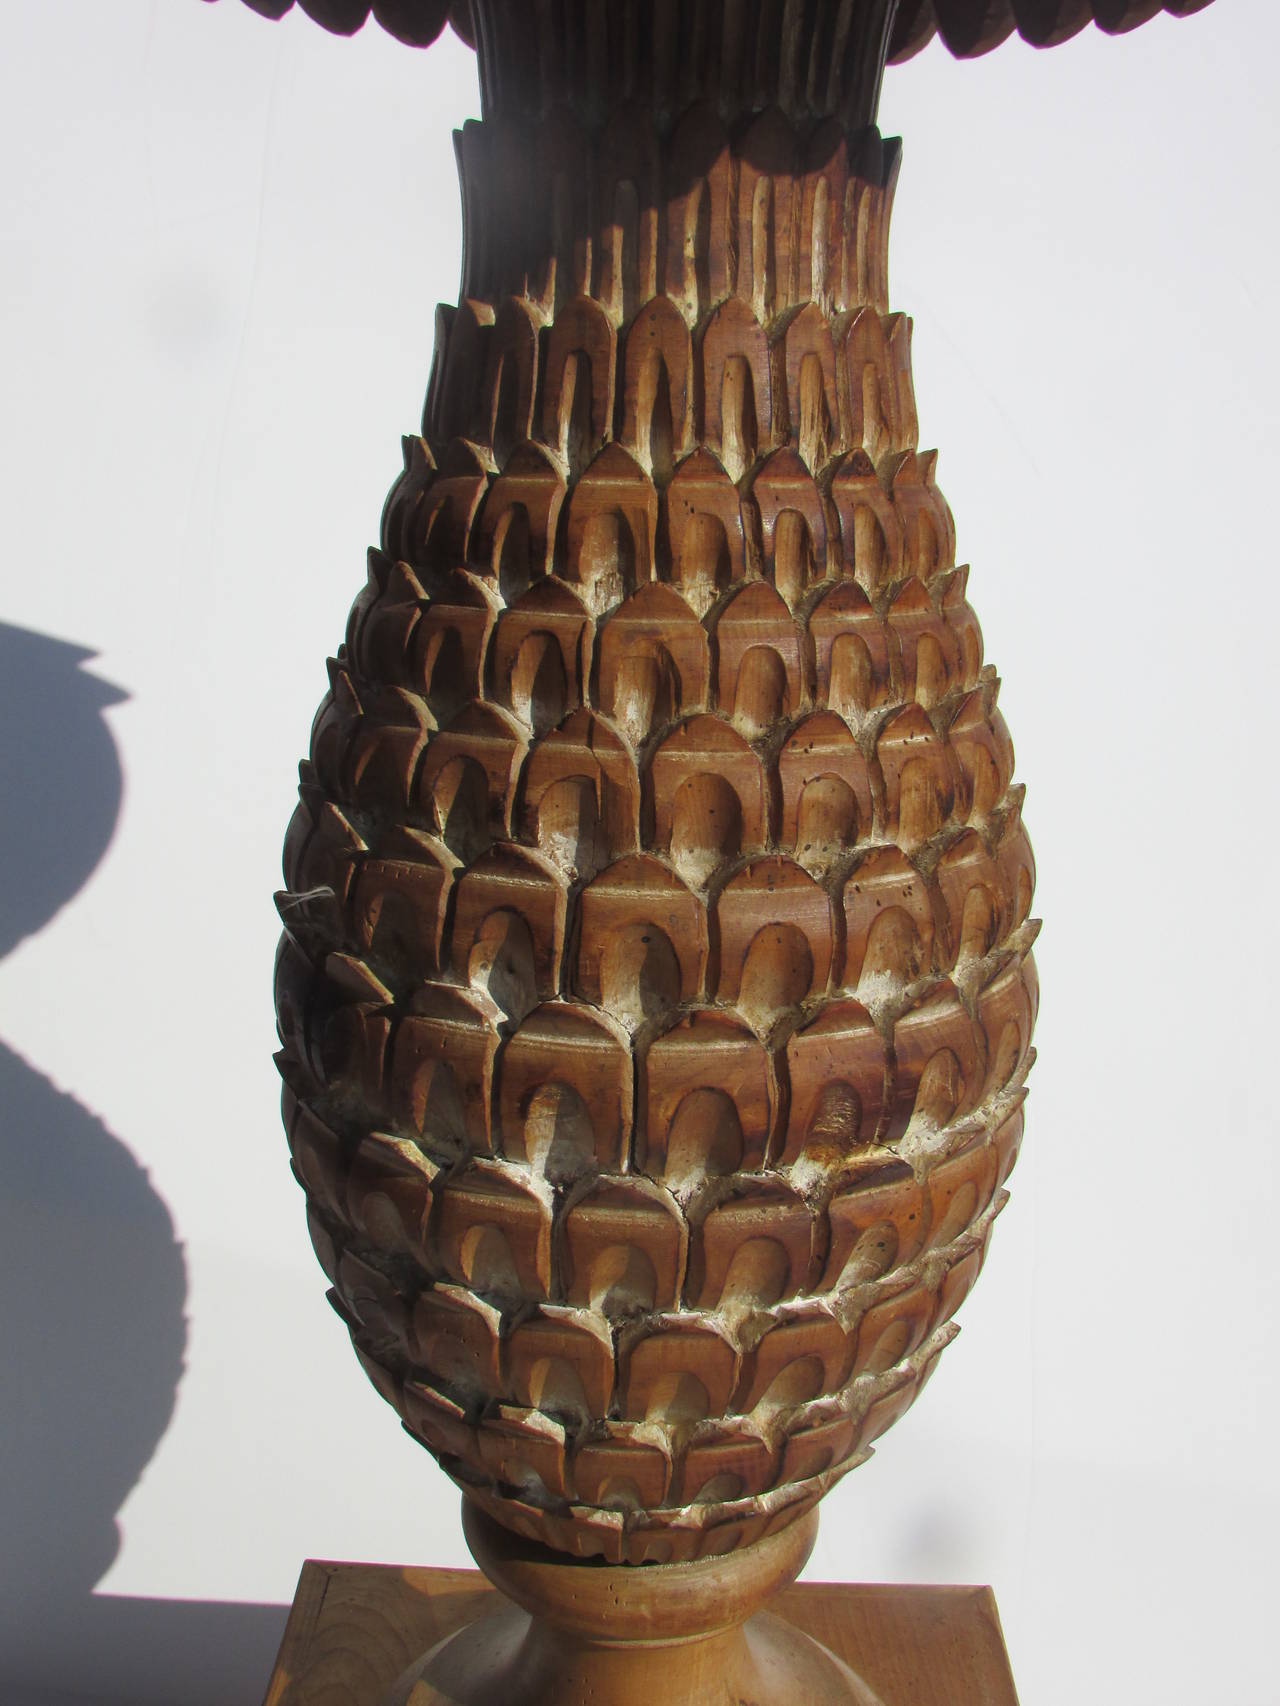 carved wooden pineapple